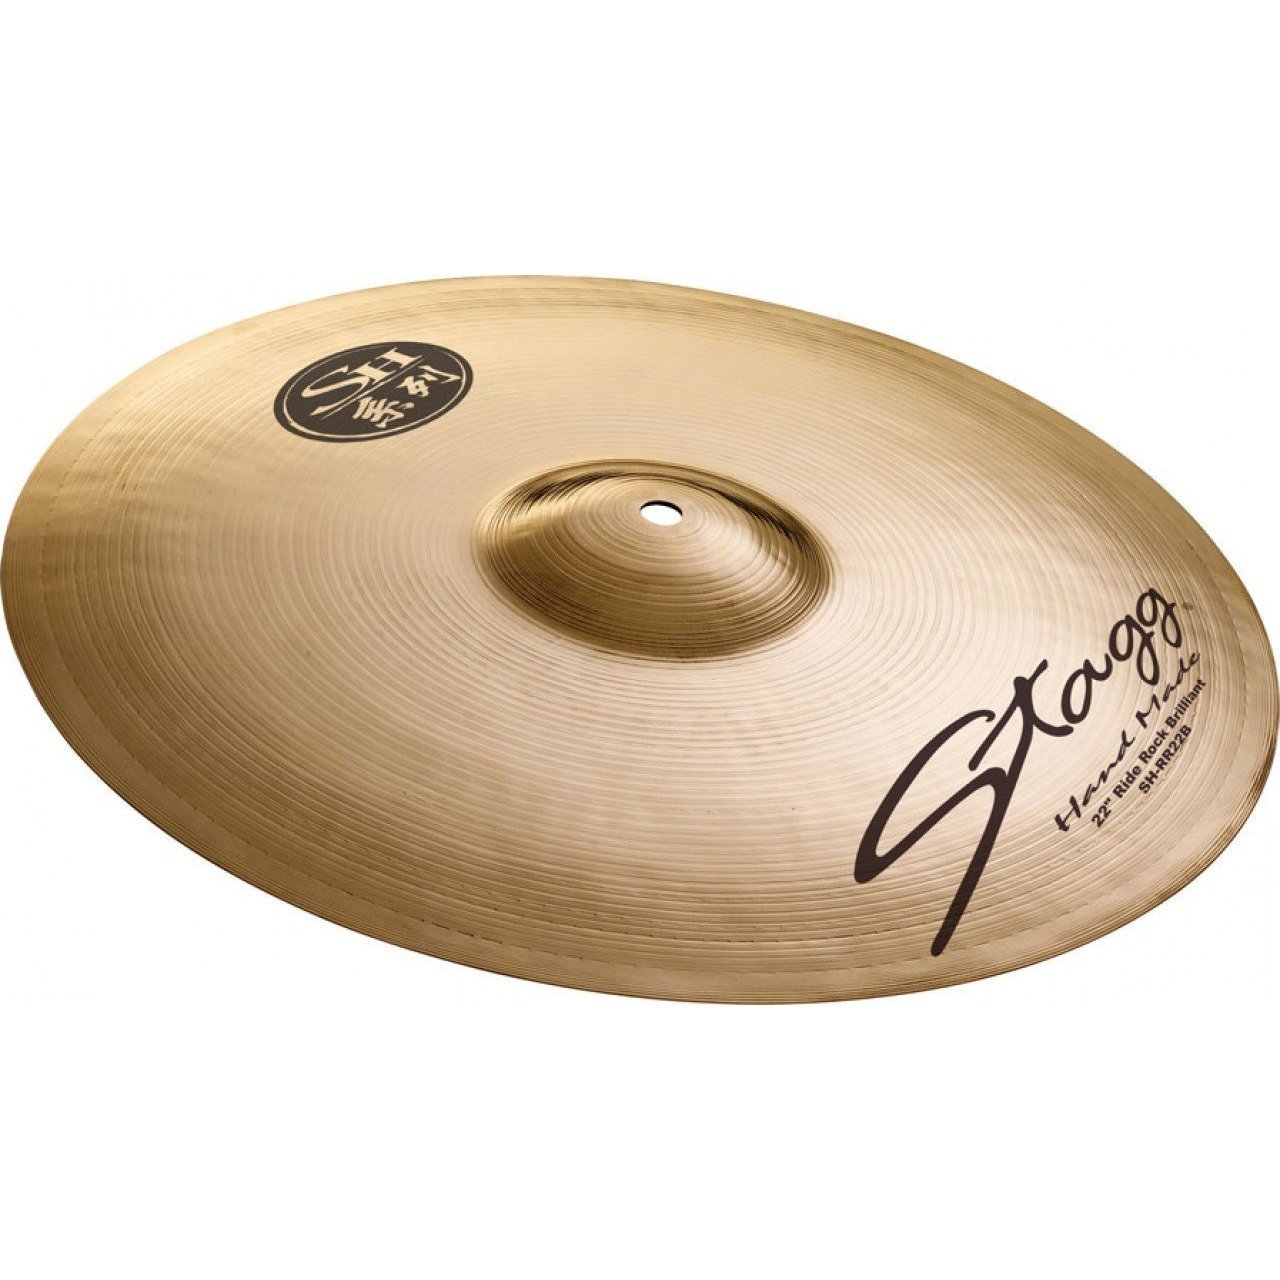 STAGG 22" INCH SH-RR22B BRILLIANT ROCK RIDE CYMBAL VERY VERSATILE